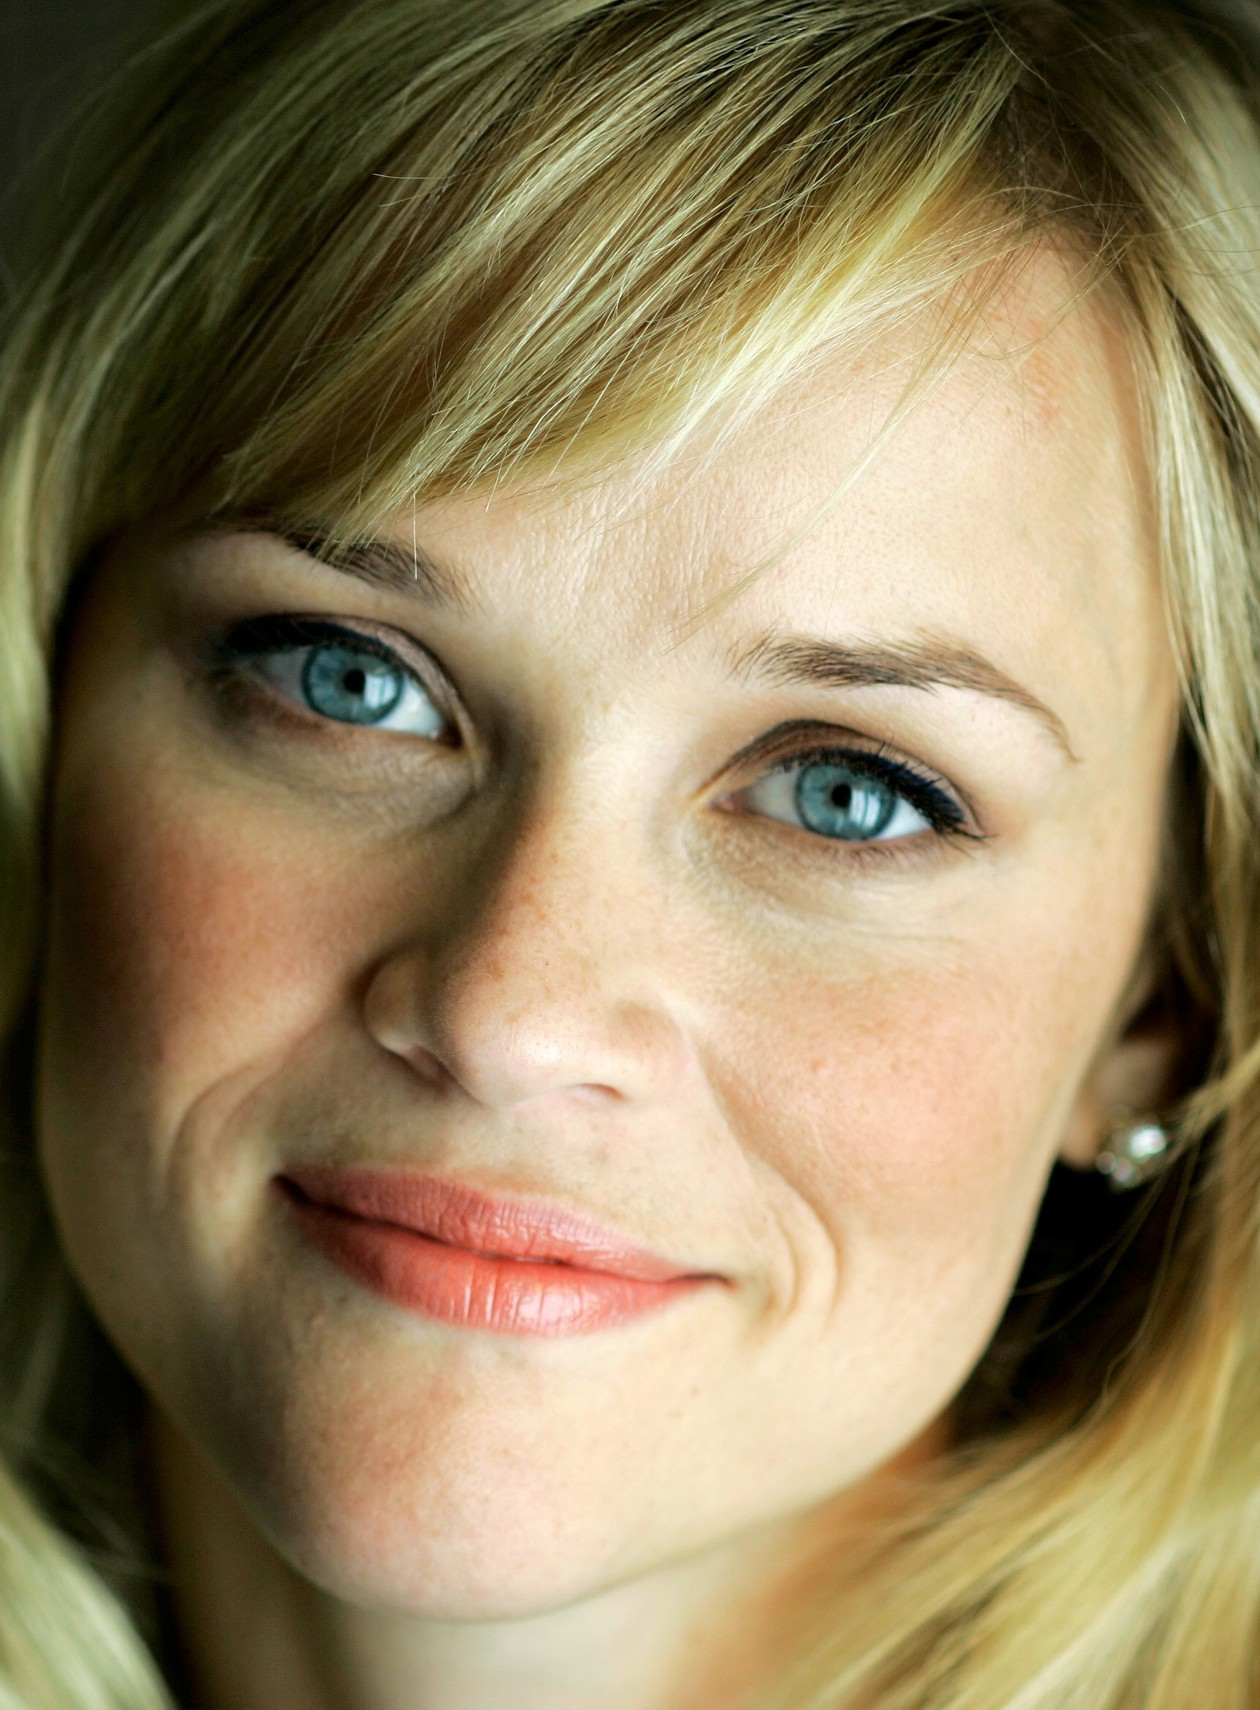 Риз Уизерспун (Reese Witherspoon)